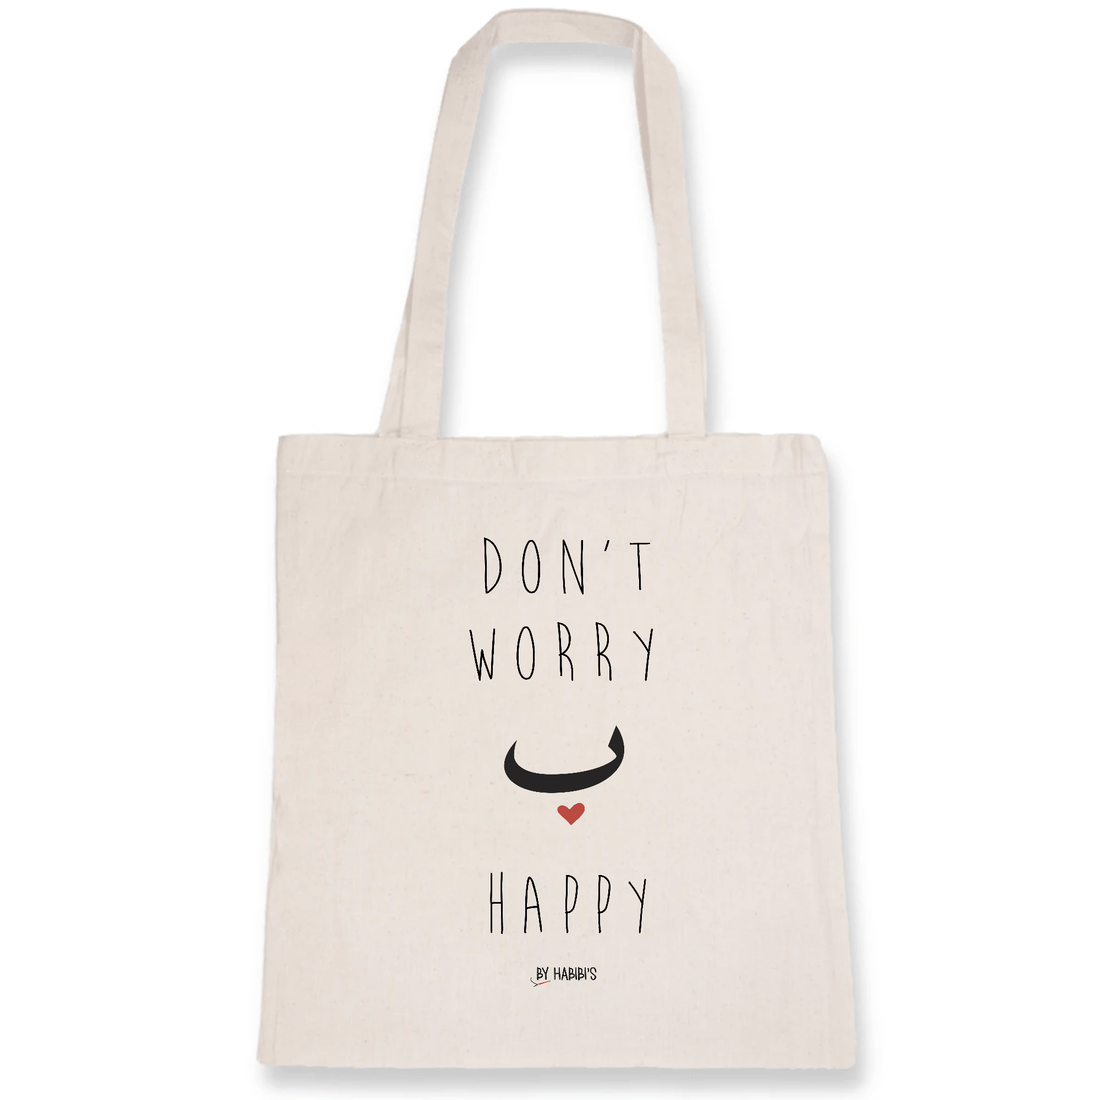 Totebag Blanc Cassé - DTG - Tote Bag <br> Don't Worry Be Happy